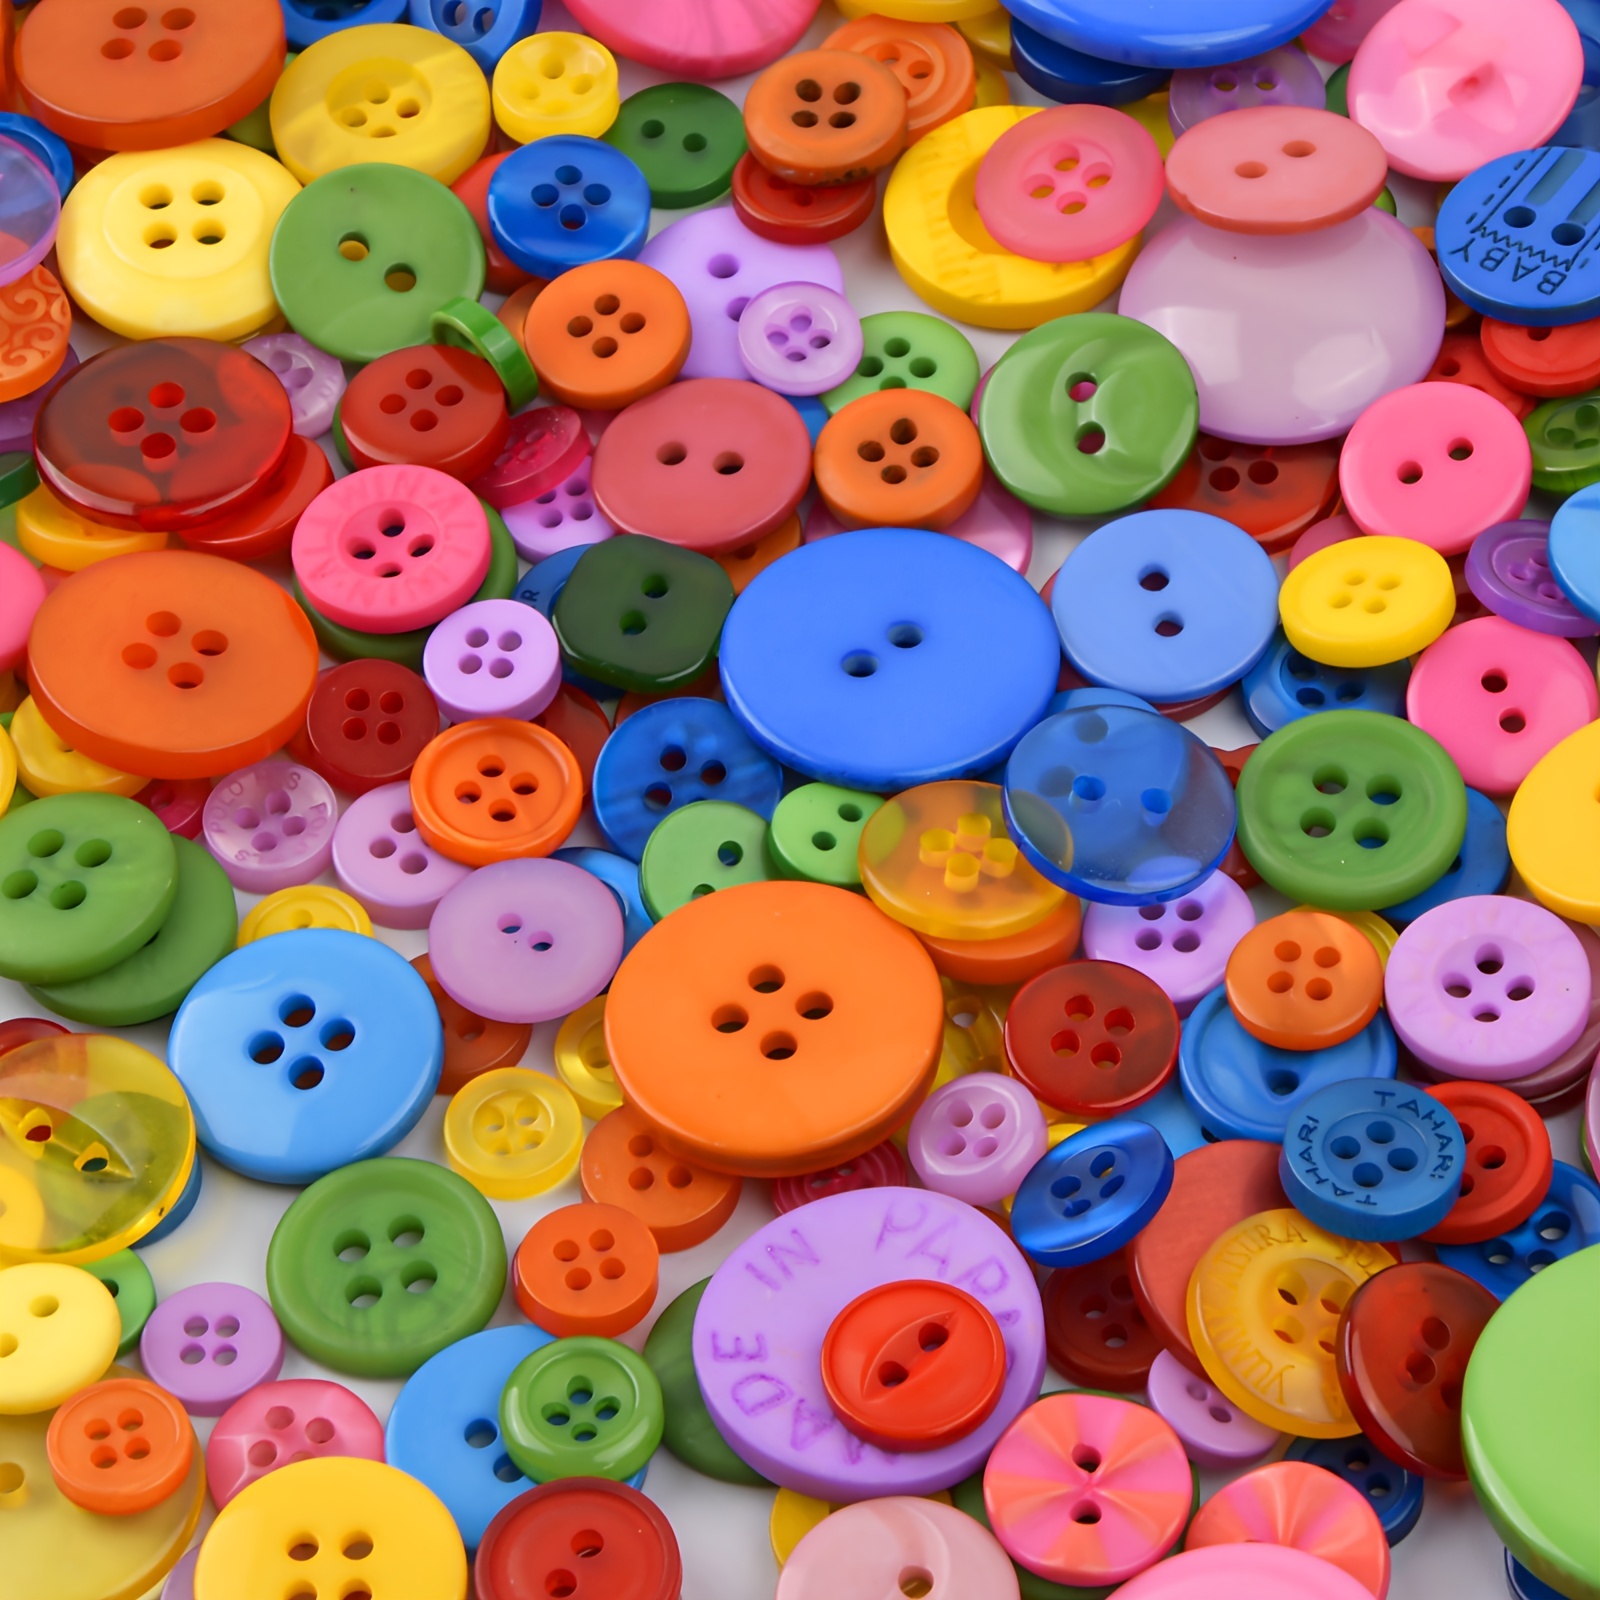 Mixed Resin Sewing Buttons 110 PCS, Round Bulk Buttons for DIY Sewing  Crafts,Coats,Suits, 5 Color 3 Size(15mm,20mm,25mm) SHUNLI